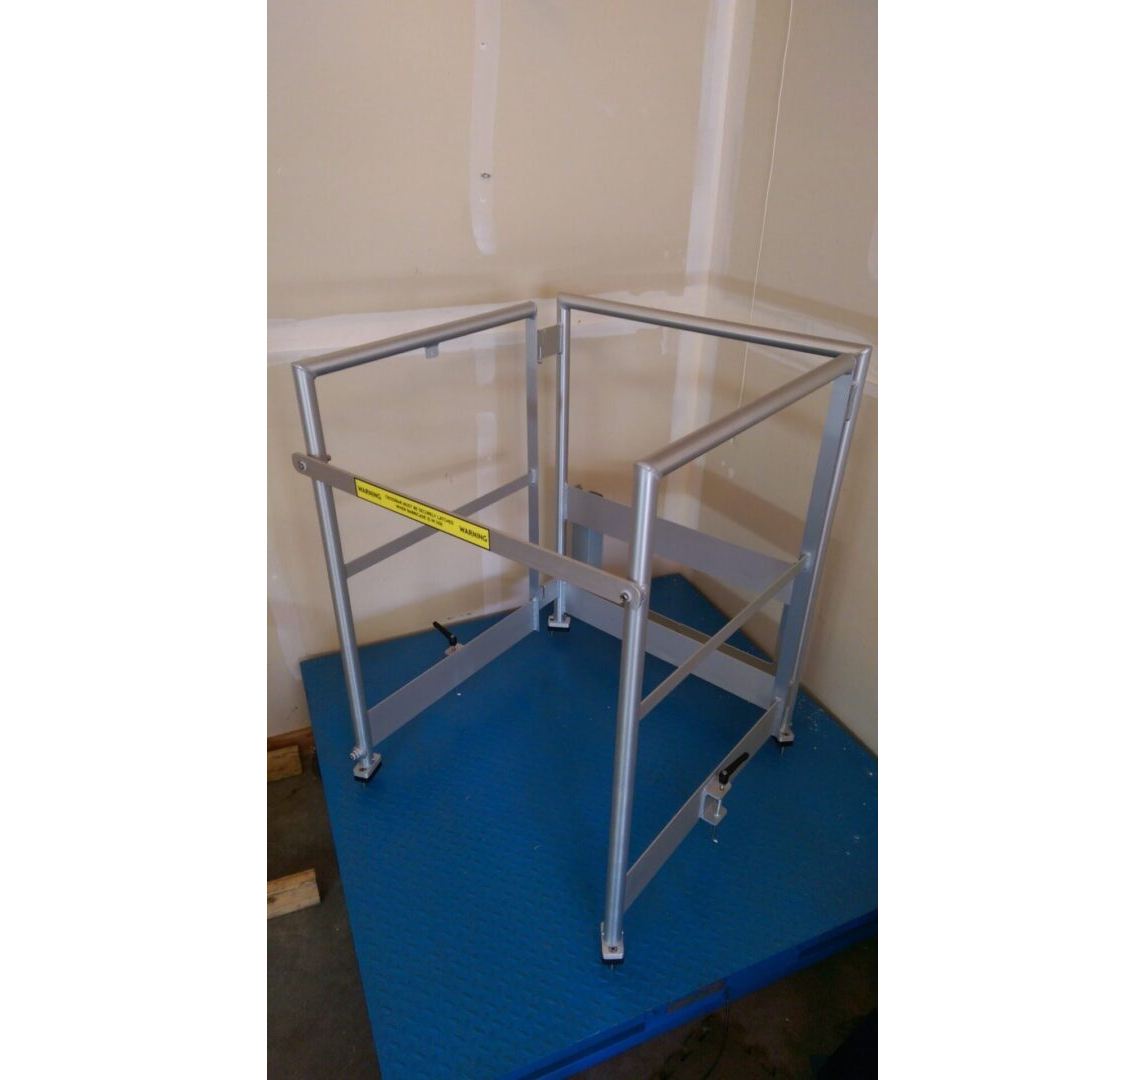 A metal frame with wheels and yellow tape on it.